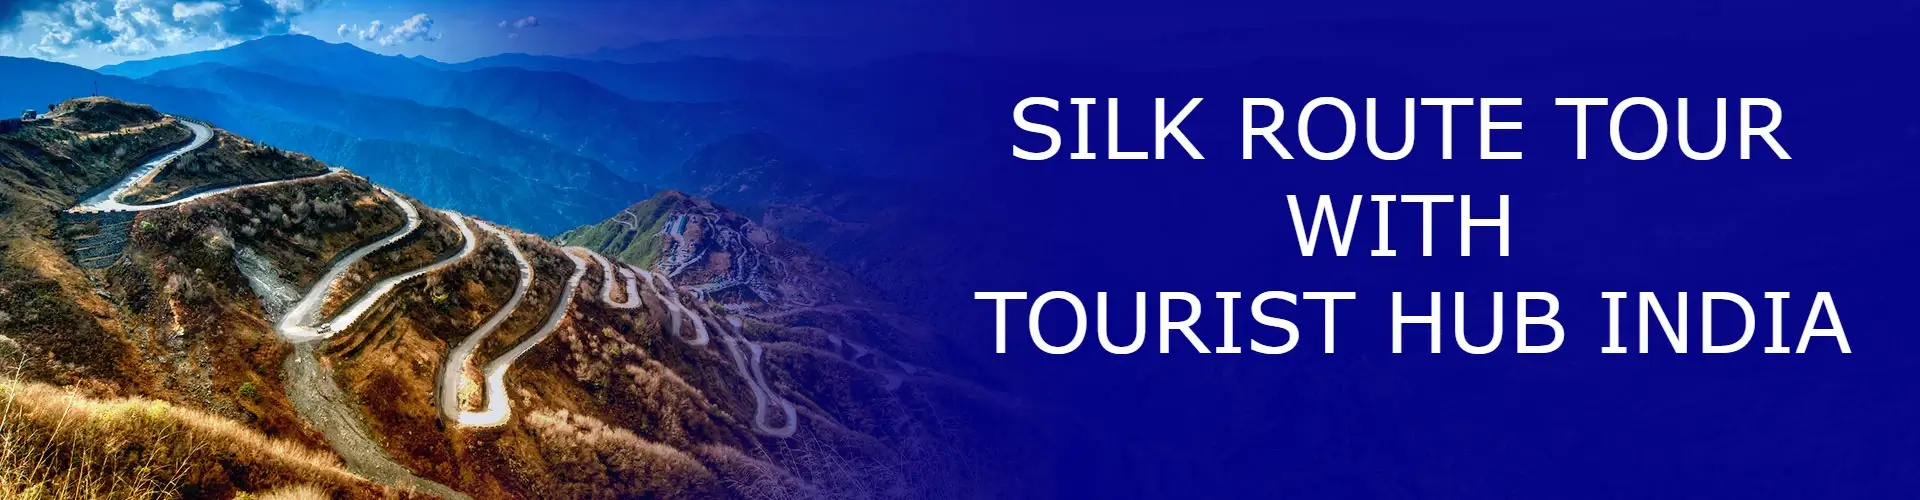 Wonderful Silk Route Package Tour Booking from Kolkata, India with TouristHubIndia - The Best Silk Route Package Tour Operator in Kolkata